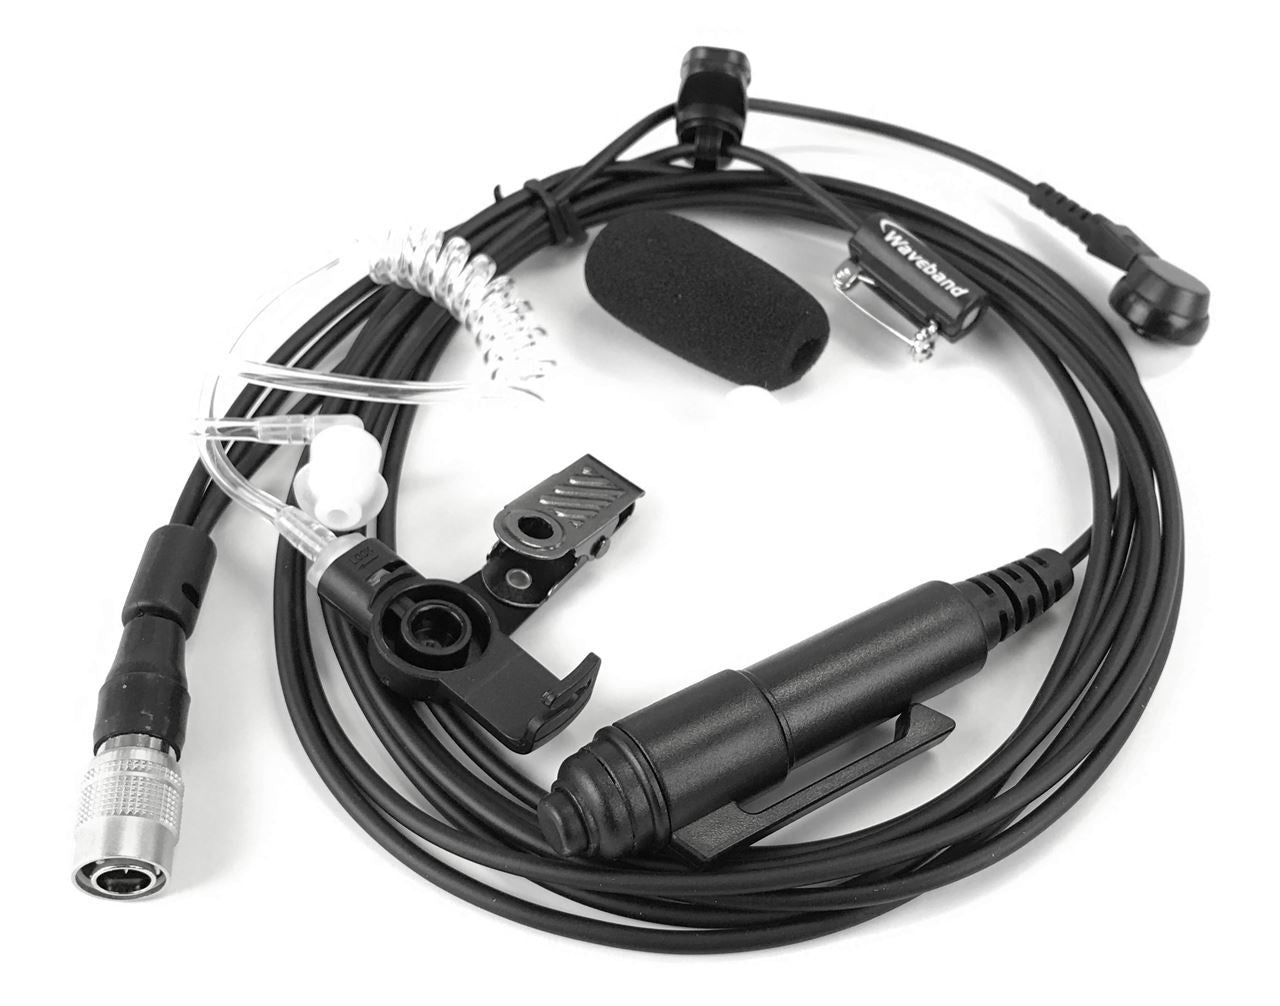 Comparable KHS-12 3 wire mini lapel mic with earphone for use with the Kenwood TK-5310 Portable Radio - Waveband Communications